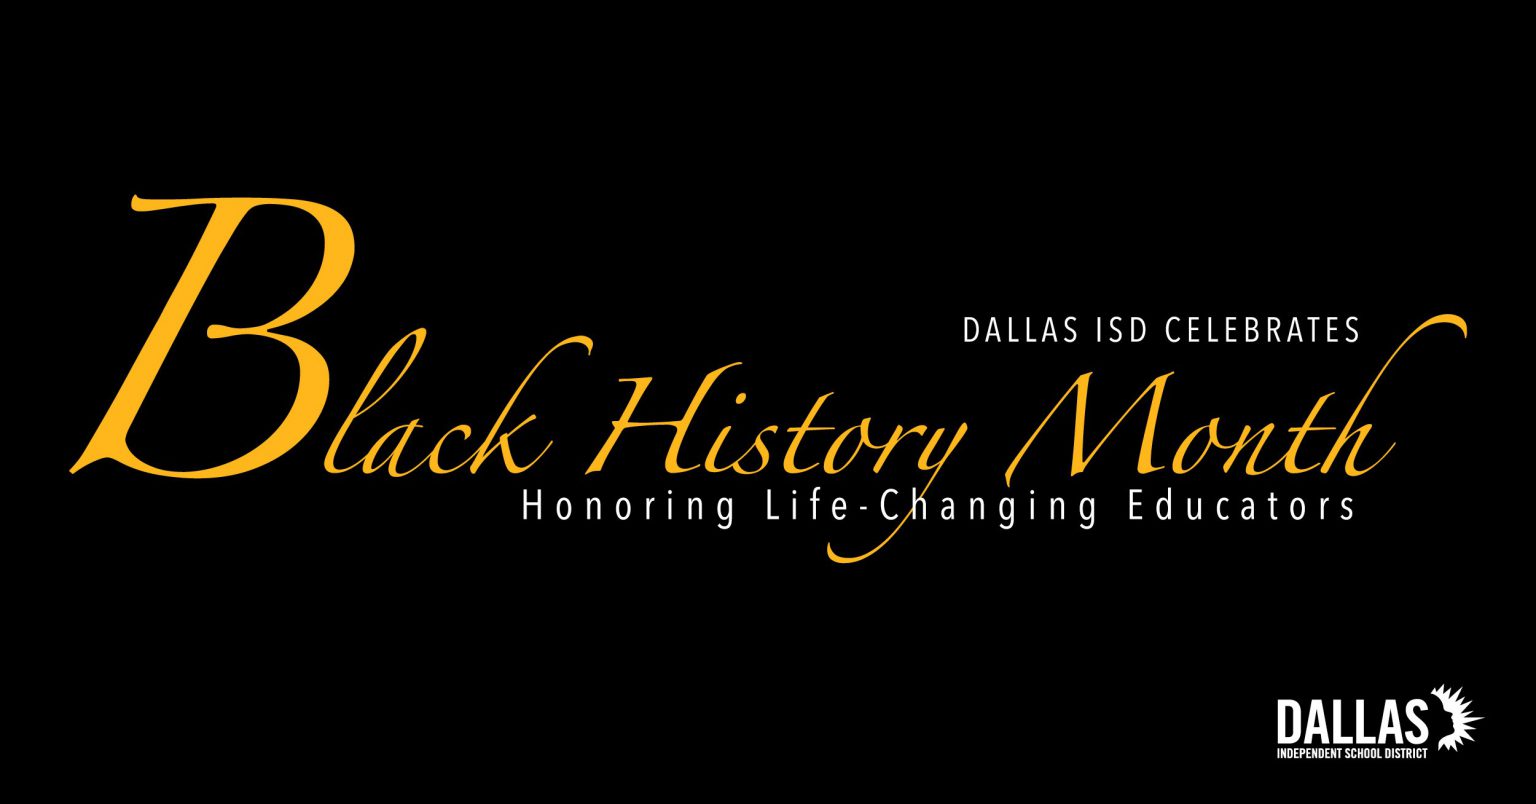 Celebrating Black History Month by honoring life-changing educators